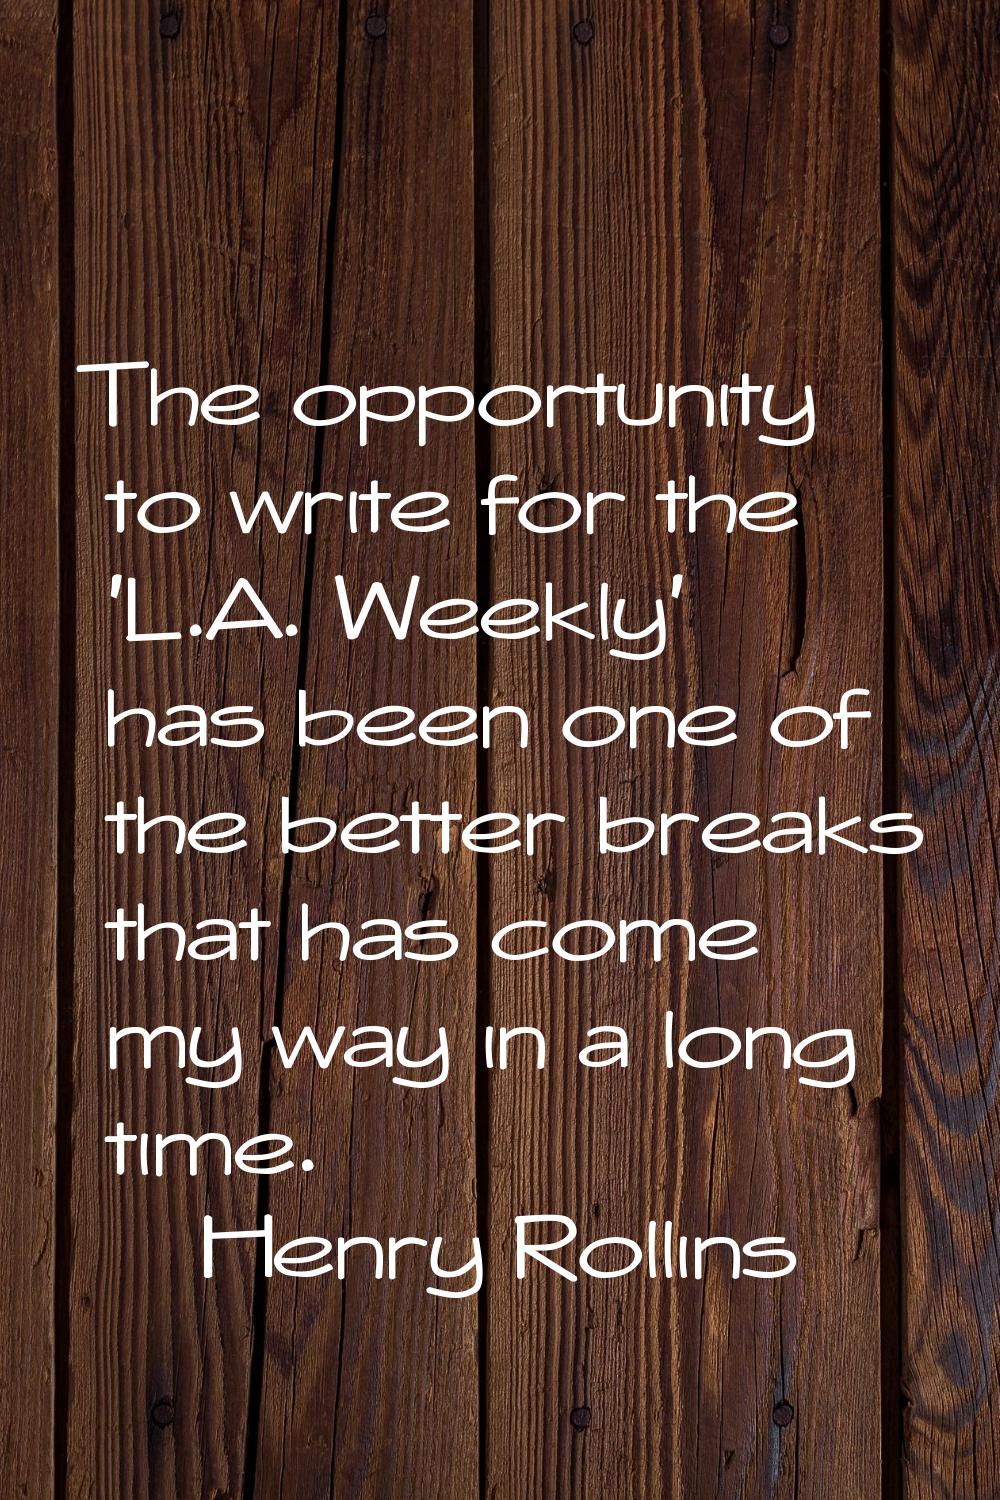 The opportunity to write for the 'L.A. Weekly' has been one of the better breaks that has come my w